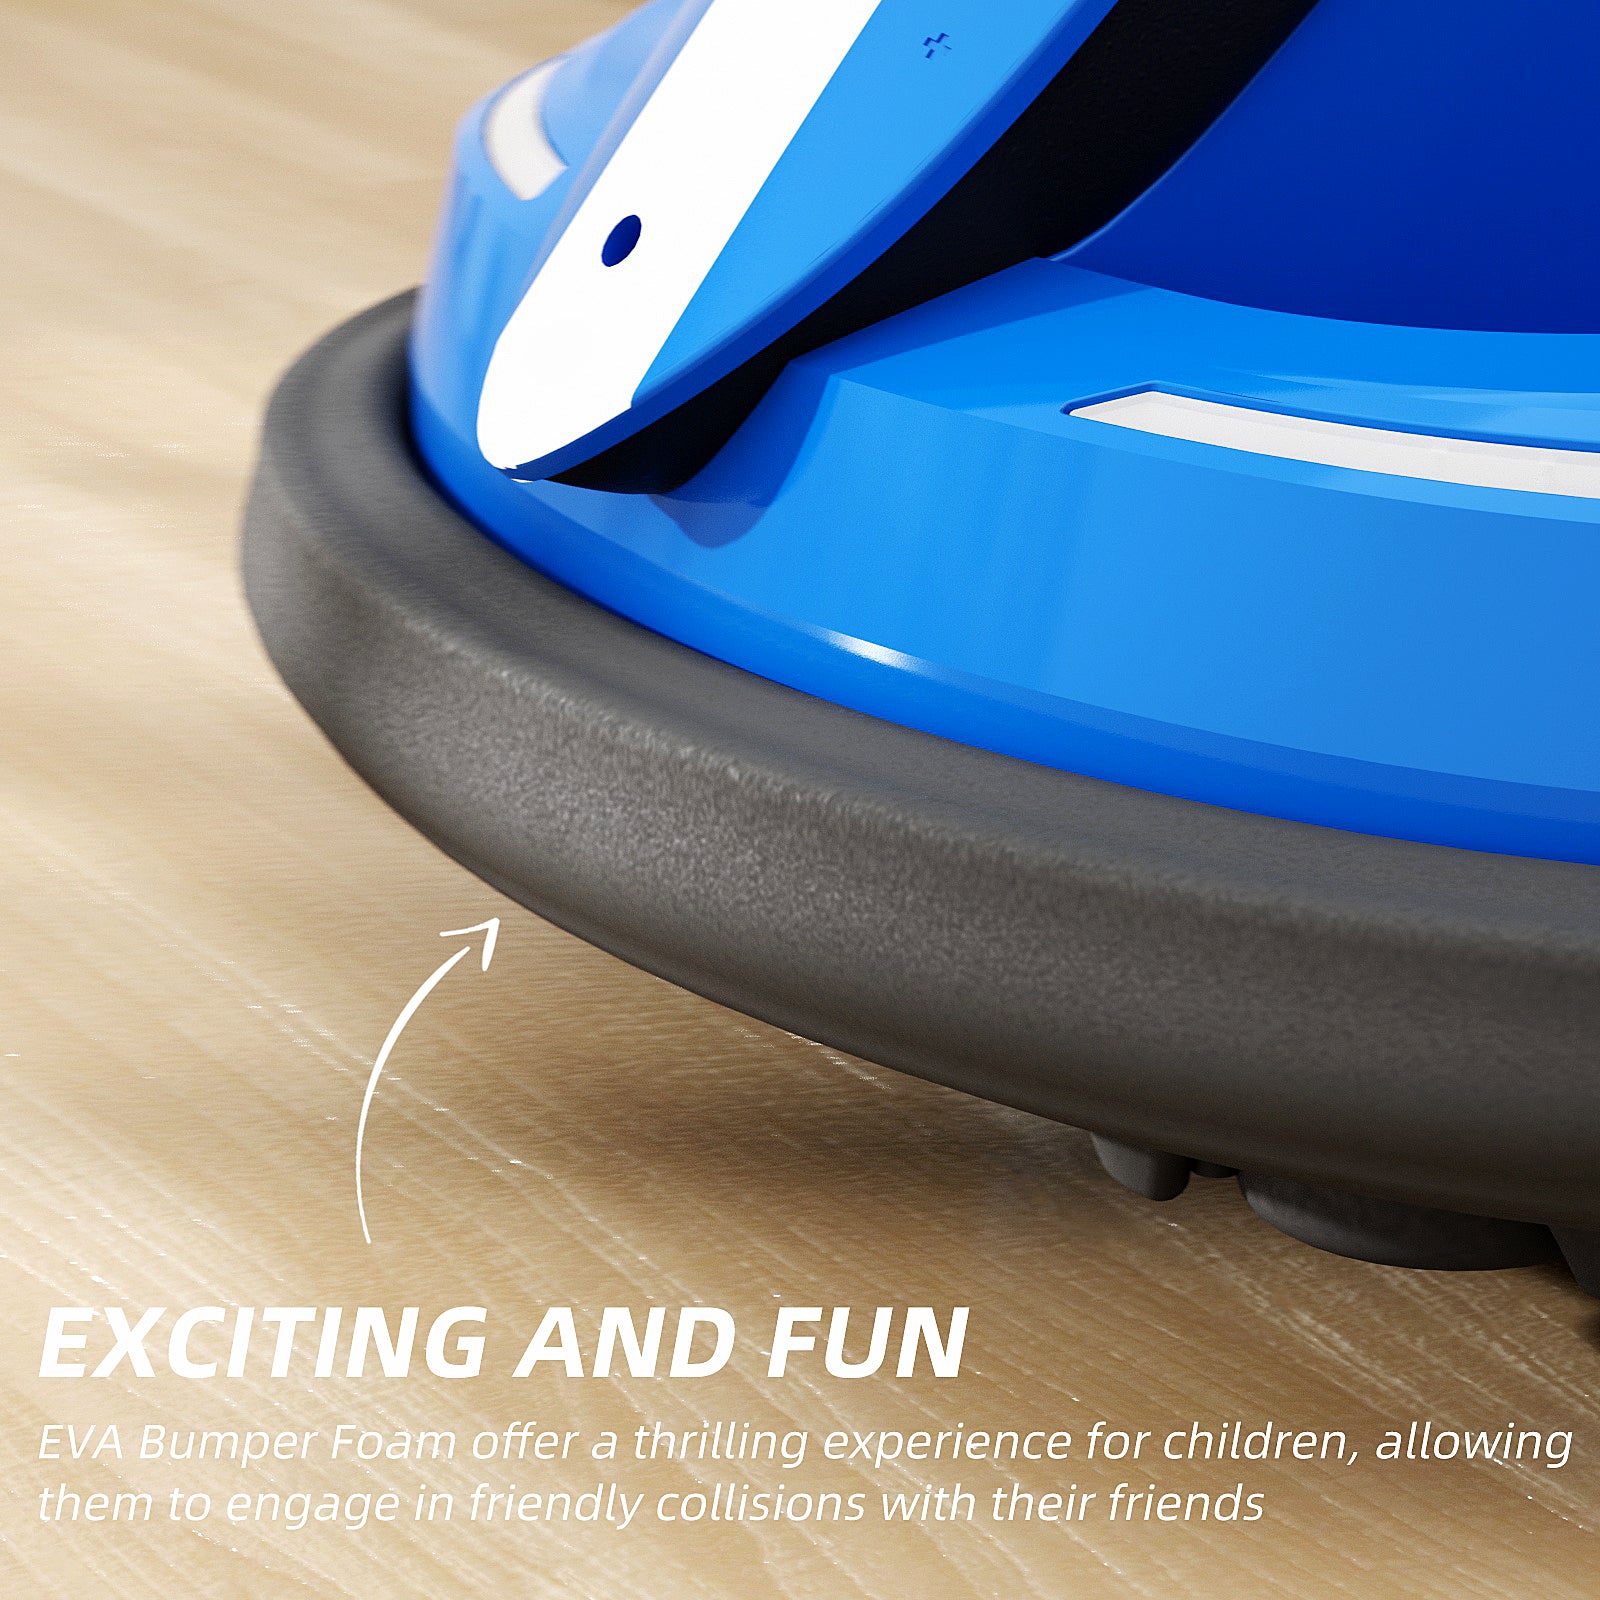 XJD 360° Spinning Toddlers Battery Powered Electric Bumper Cars for Kids Age 1.5+, Blue